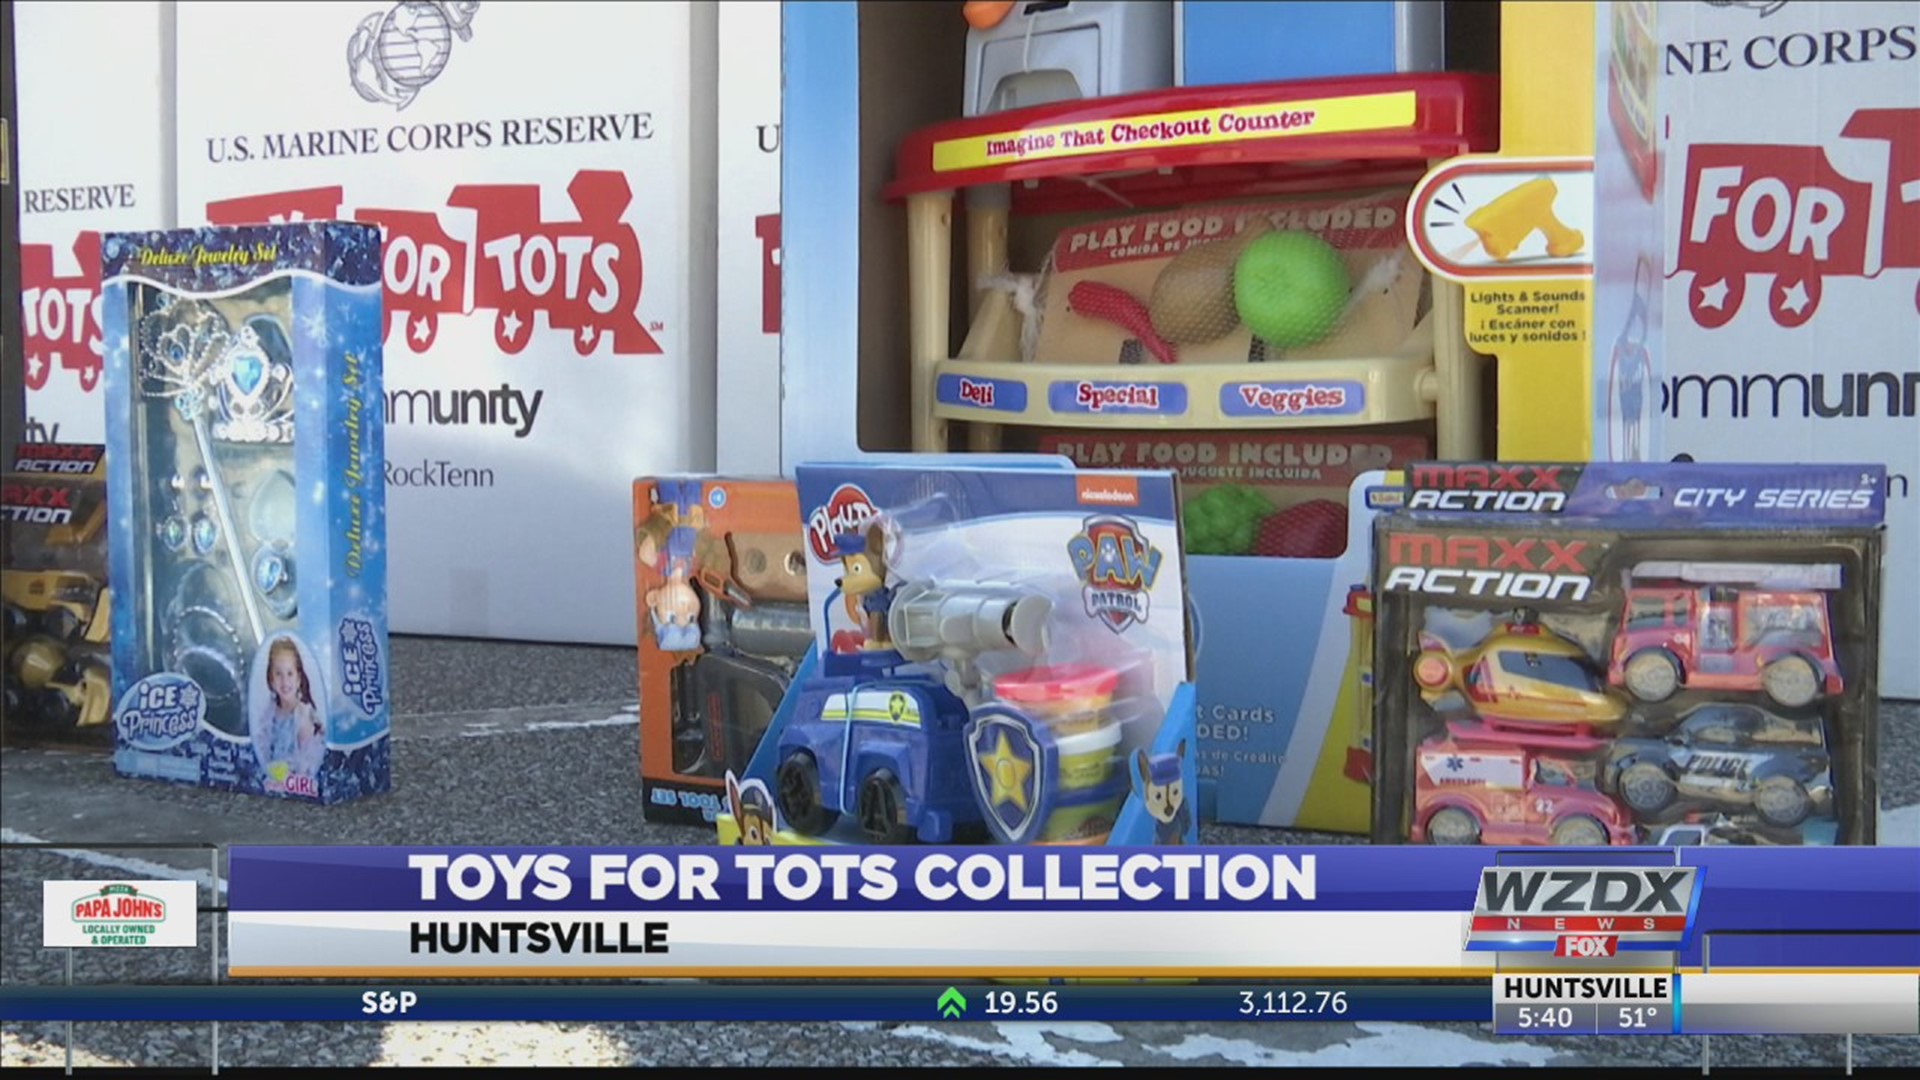 Make a child's Christmas special by donating to Toys for Tots at Parkway Scrubs in Huntsville Wednesday until 6 p.m.